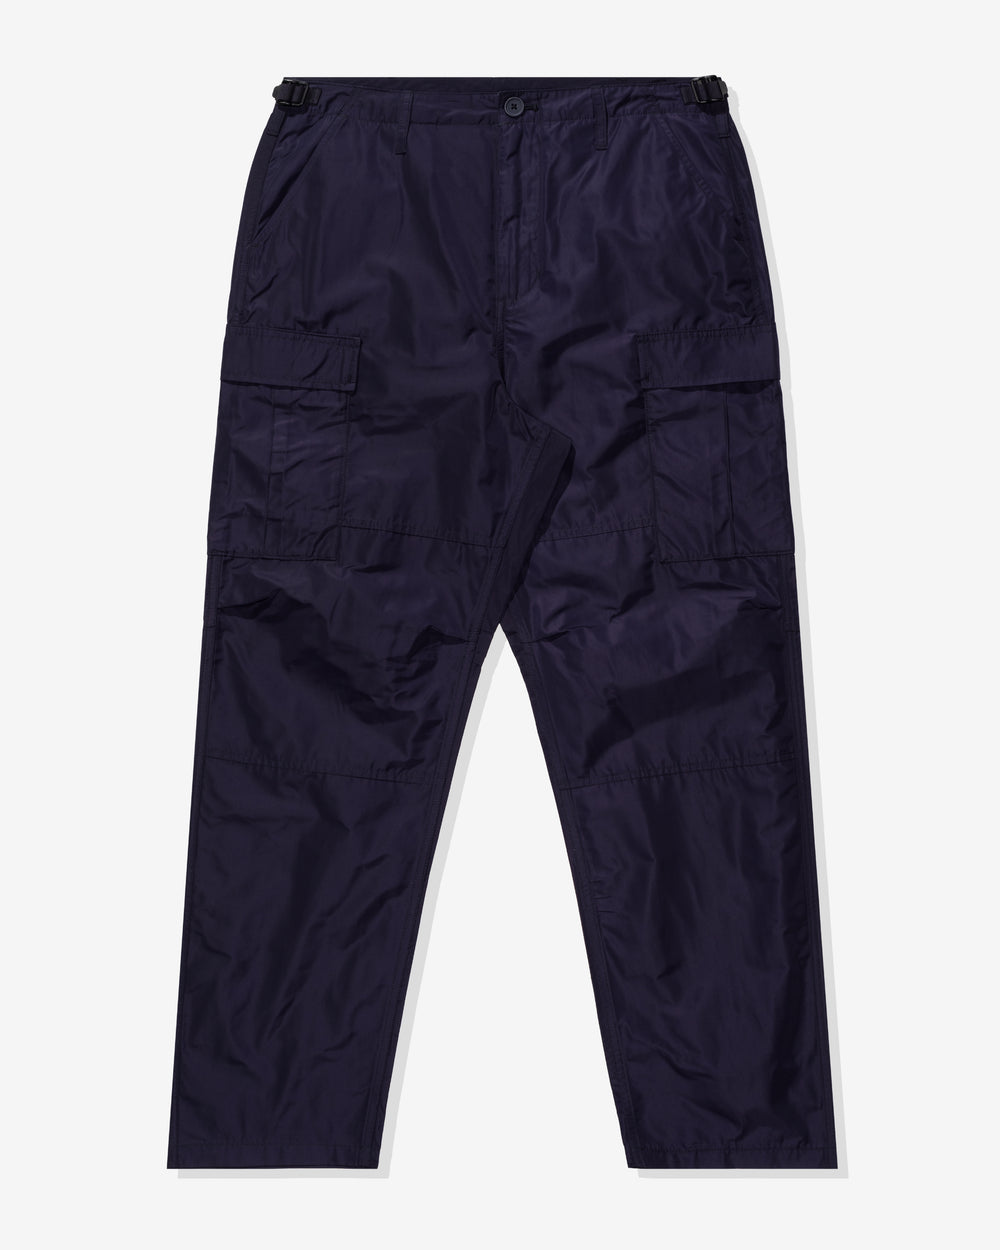 UNDEFEATED TECH CARGO PANT - NAVY / 28